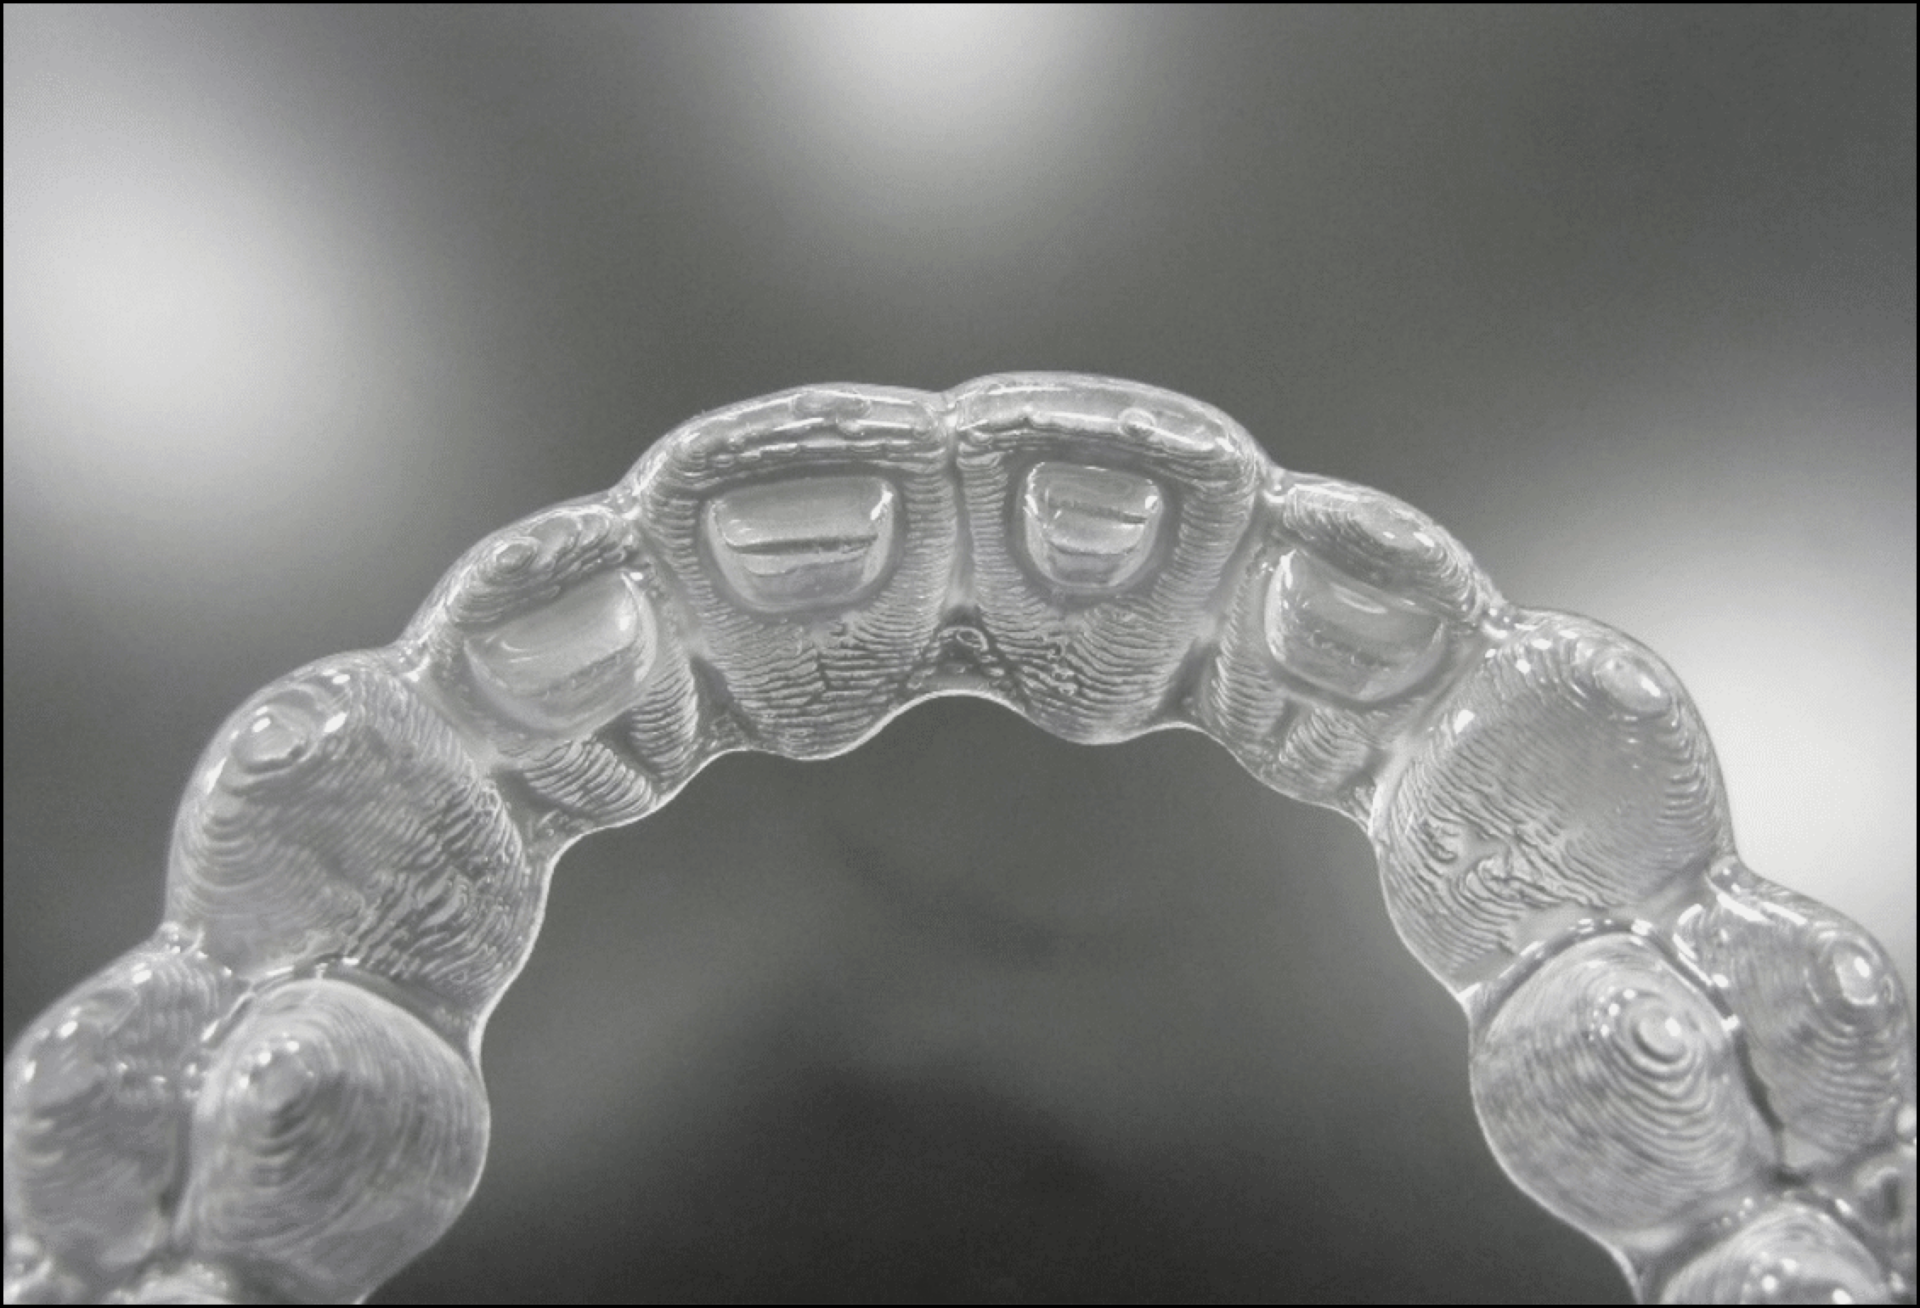 image of posterior view of Invisalign aligners, bite ramps are visible